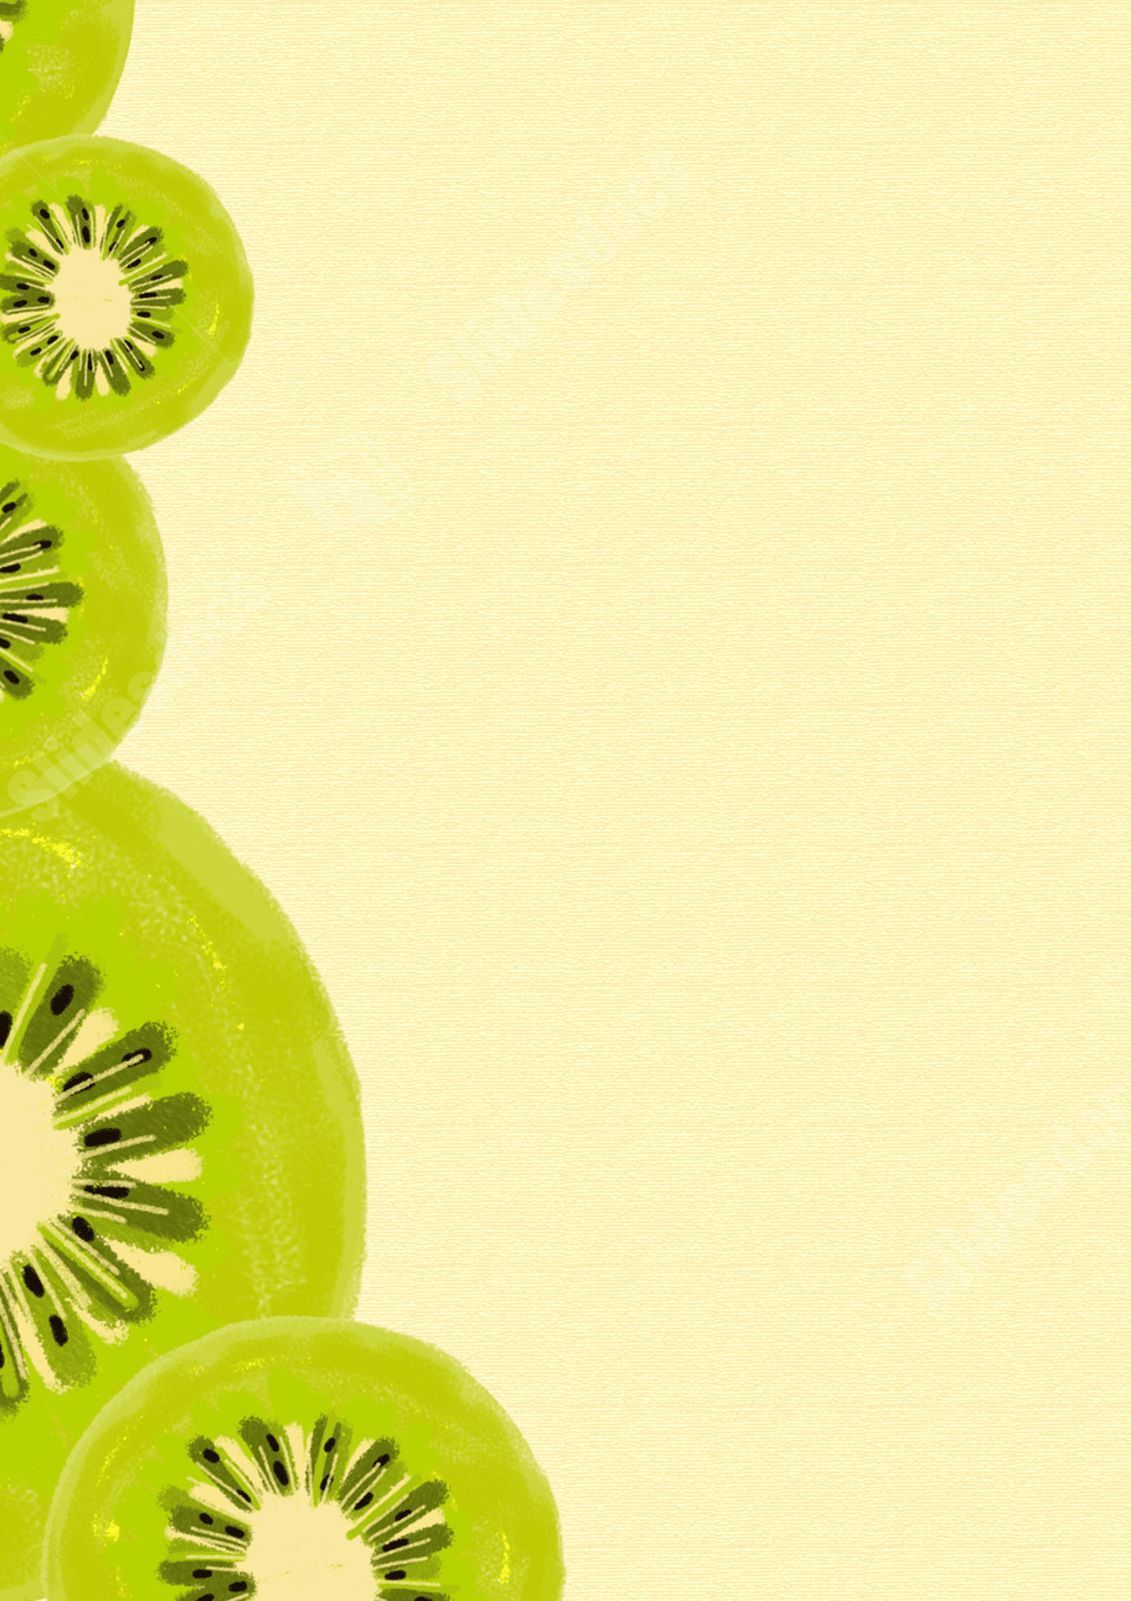 Fresh And Colorful Kiwifruit Page Border Background Word And Google Docs For Free Download